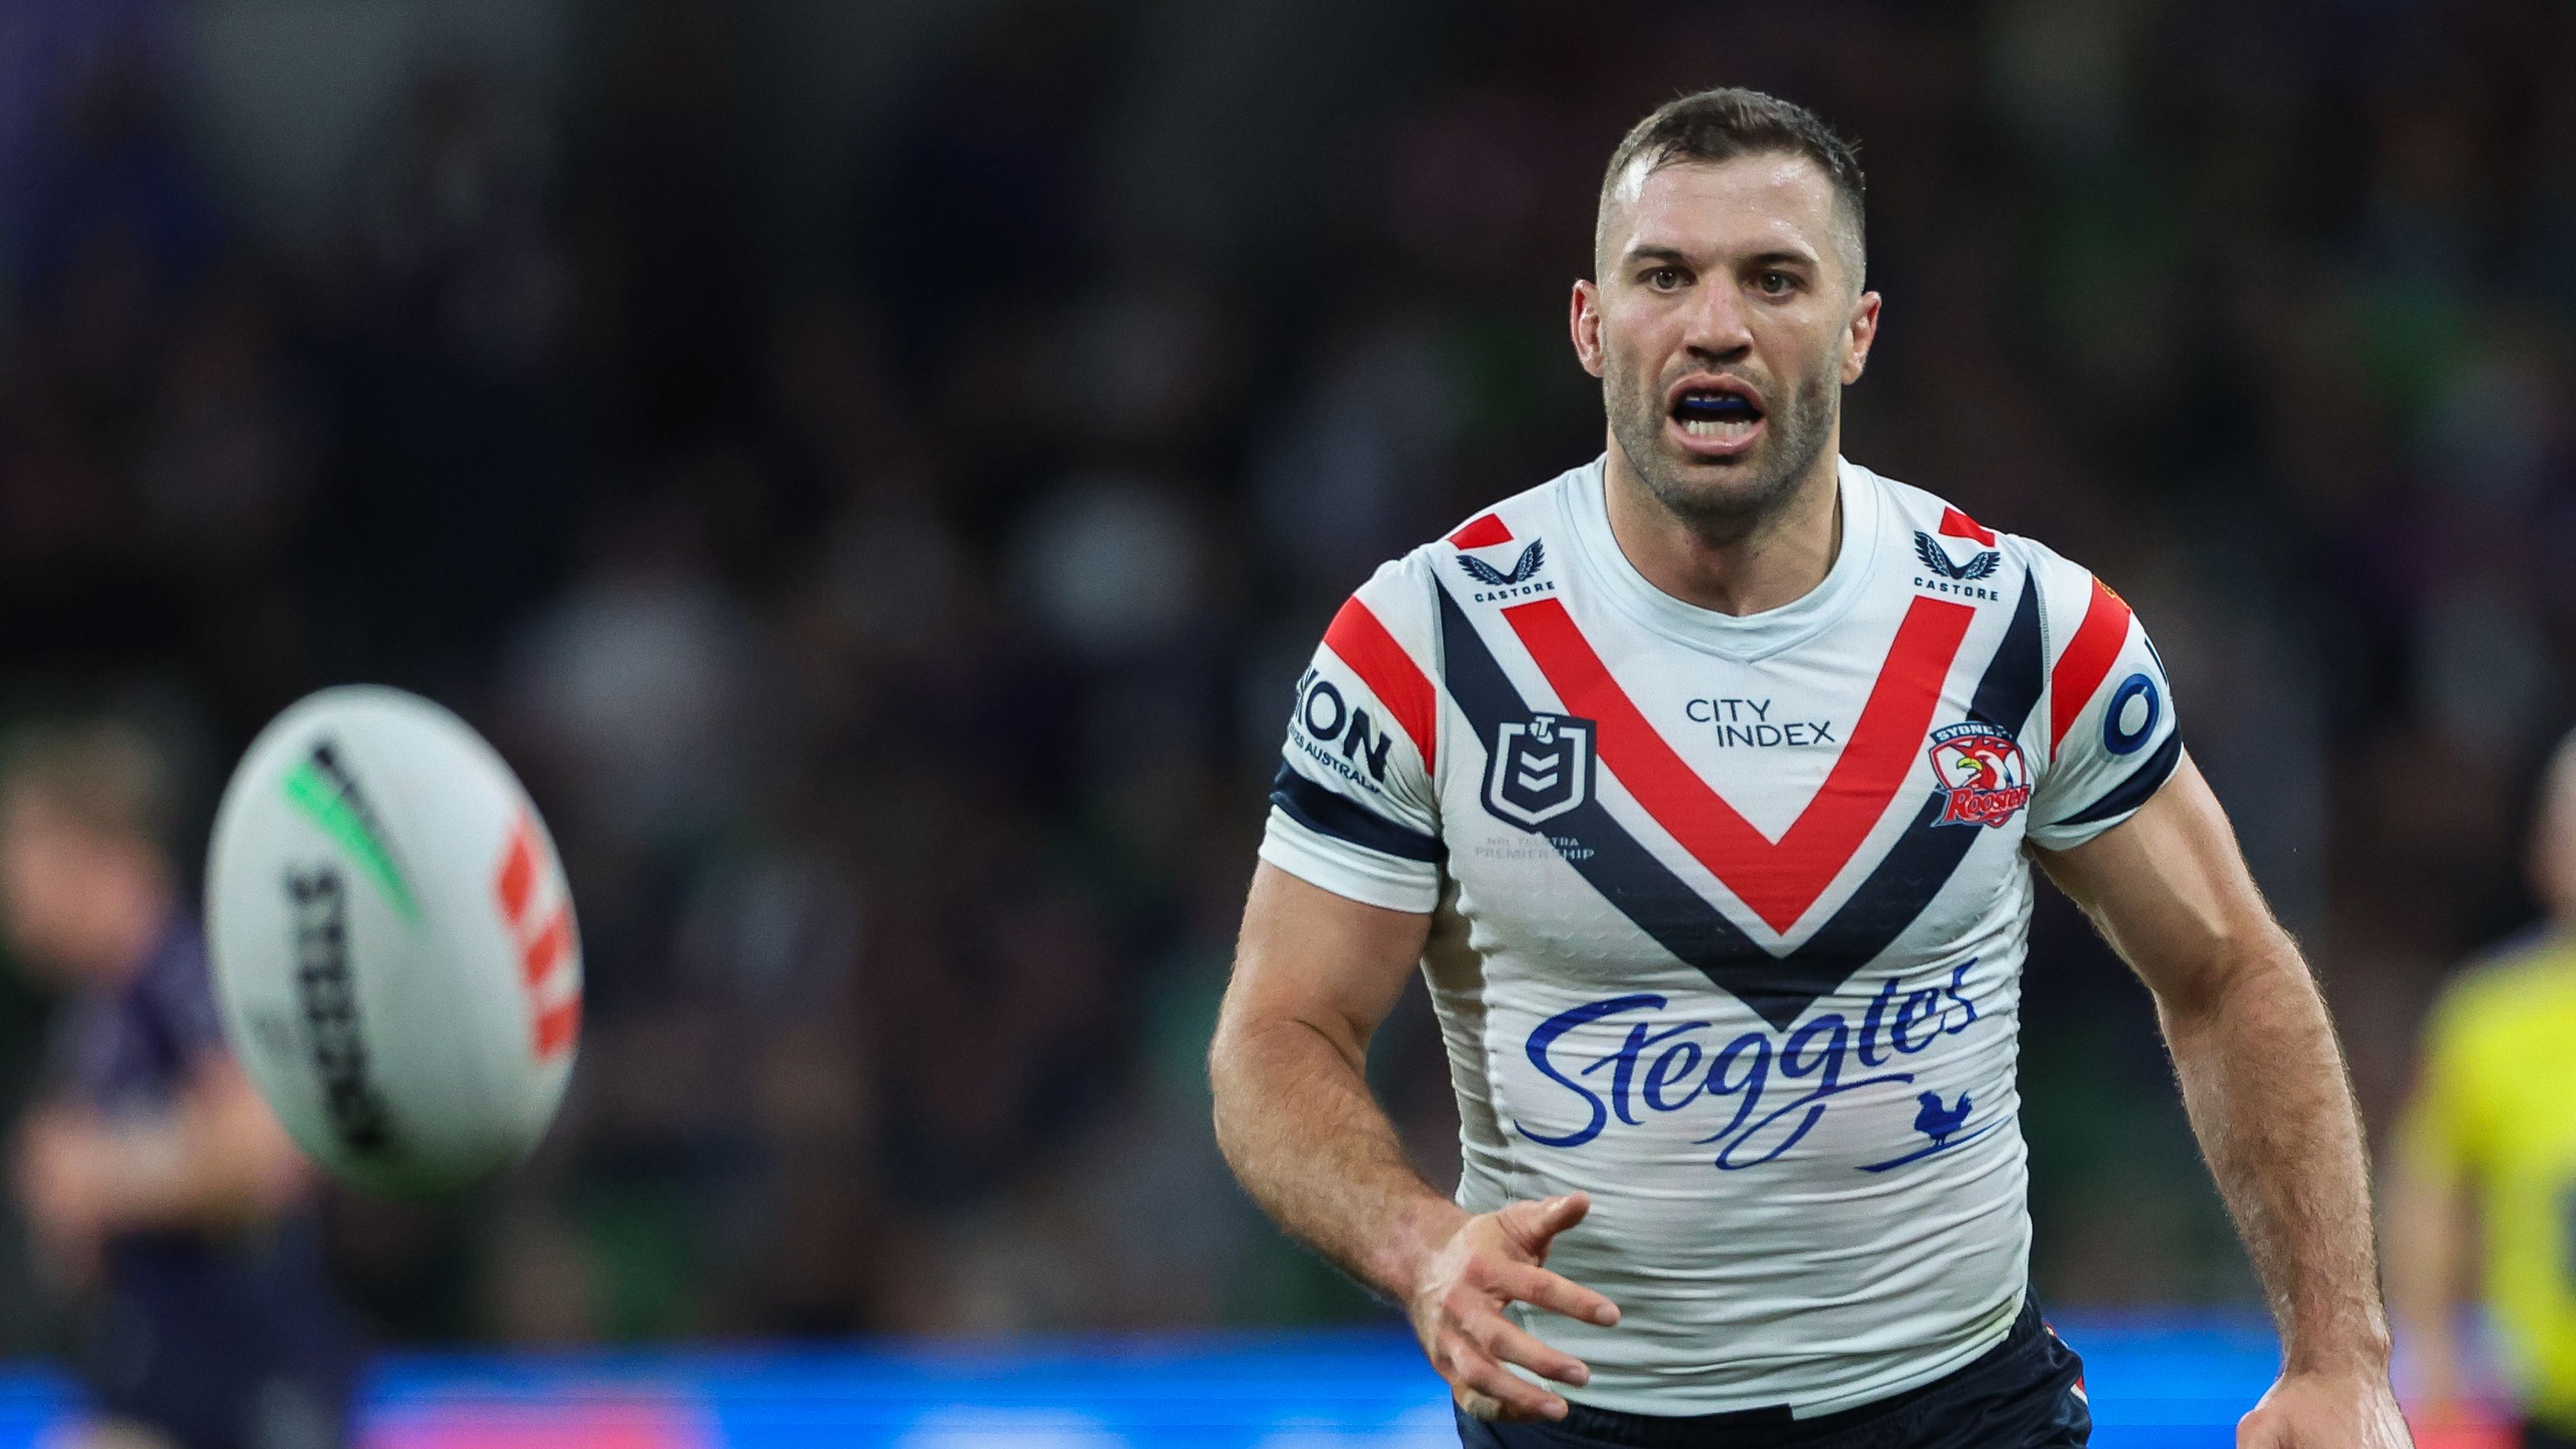 James Tedesco during warm ups for ahead of the semi-final between the Storm and Roosters.